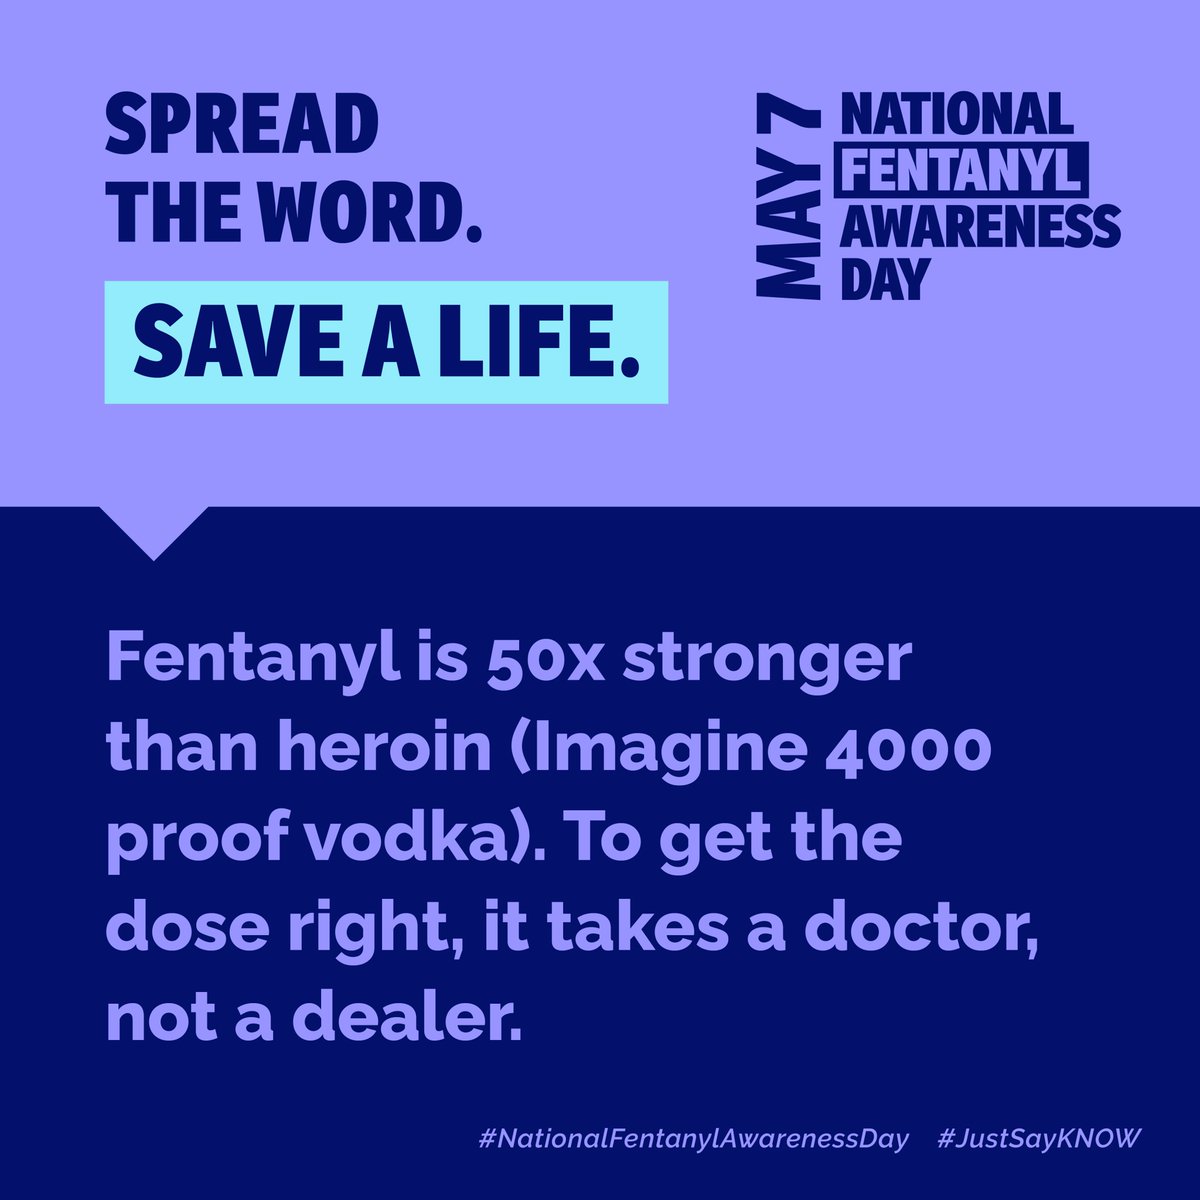 May 7th is #NationalFentanylAwarenessDay. Fentanyl is now found in fake pills and many street drugs, but users are often unaware that their drugs contain the potent opioid. #PreventOverdose